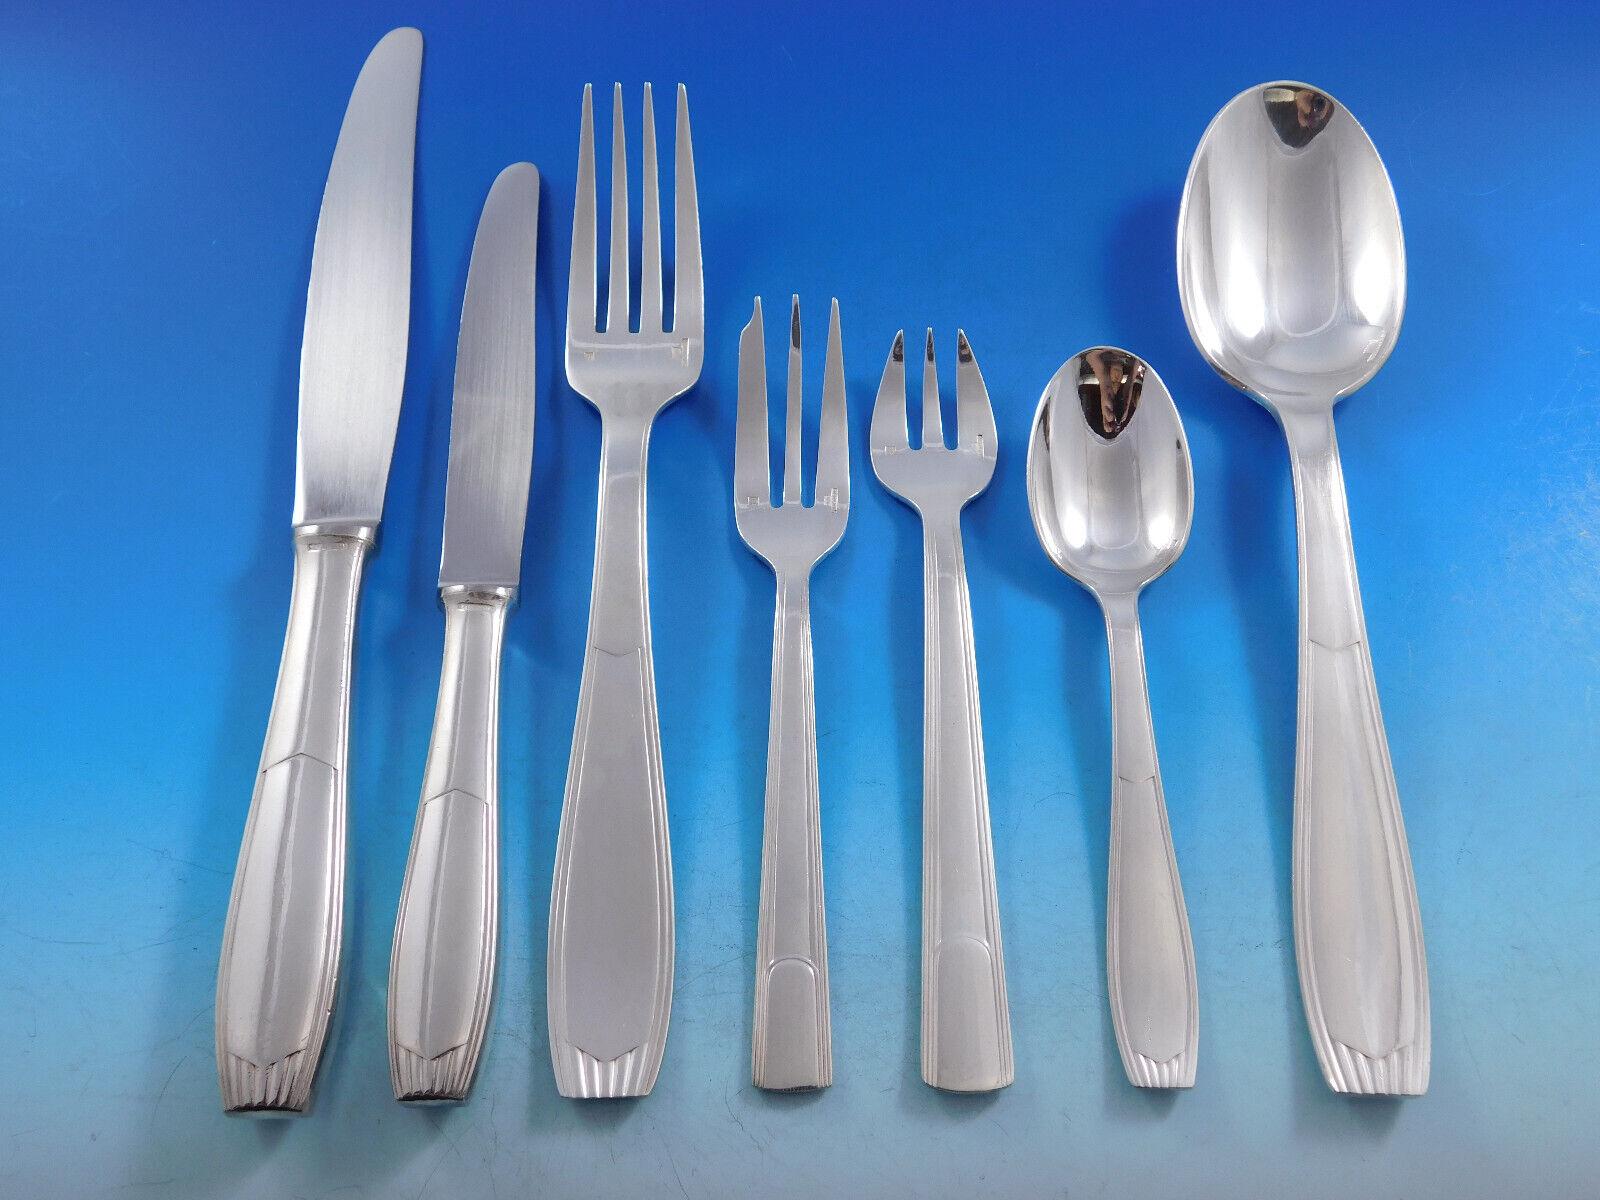 Rare Dinner Size Saigon by Christofle France Silverplate Flatware set - 70 pieces. This set includes:

10 Dinner Size Knives, 9 3/4